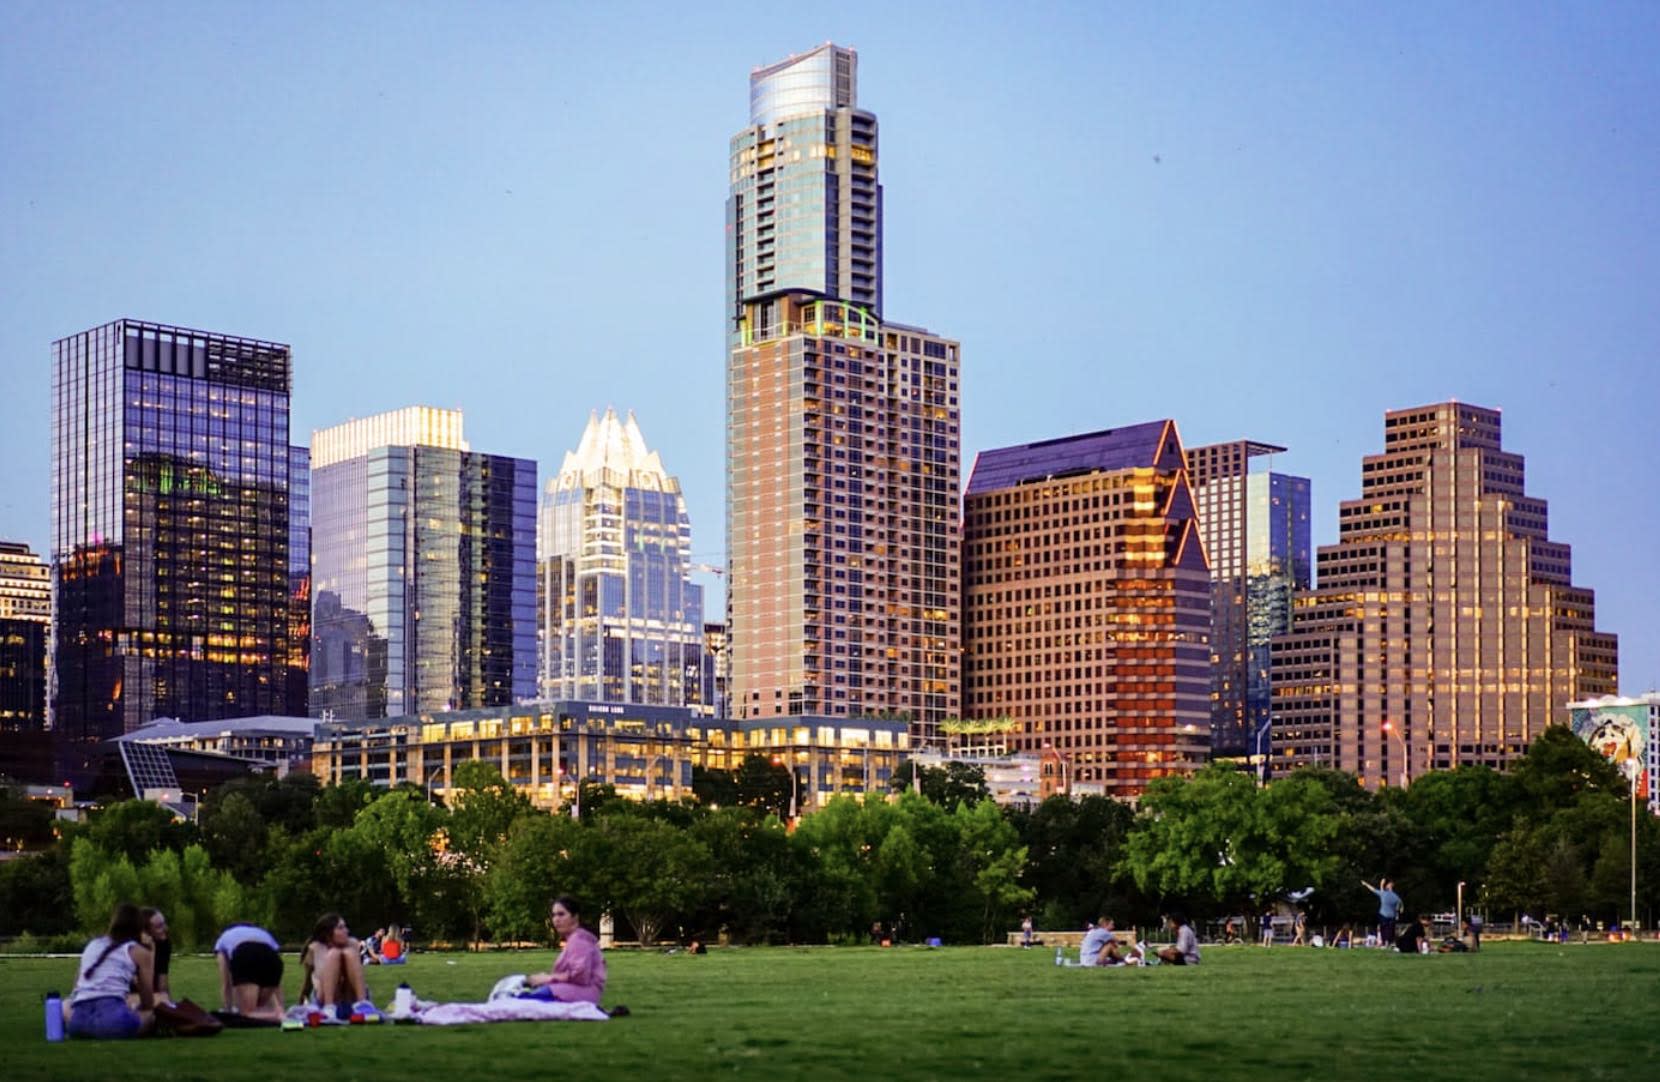 Austin cityscape - young people on the grass